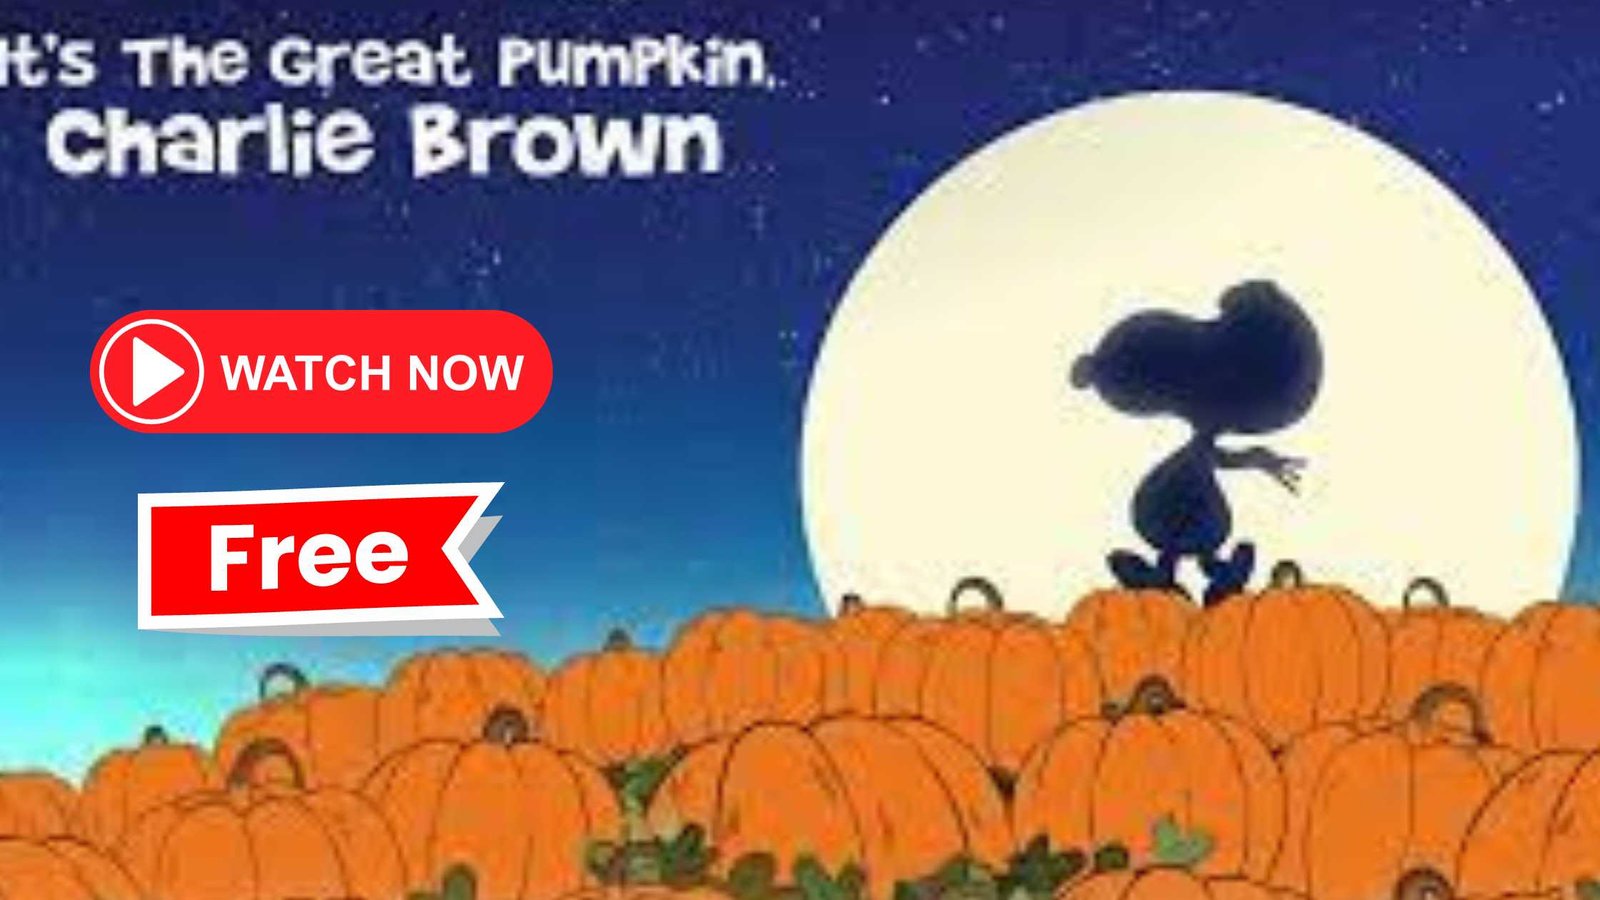 How to Watch “It’s the Great Pumpkin, Charlie Brown” in 2023